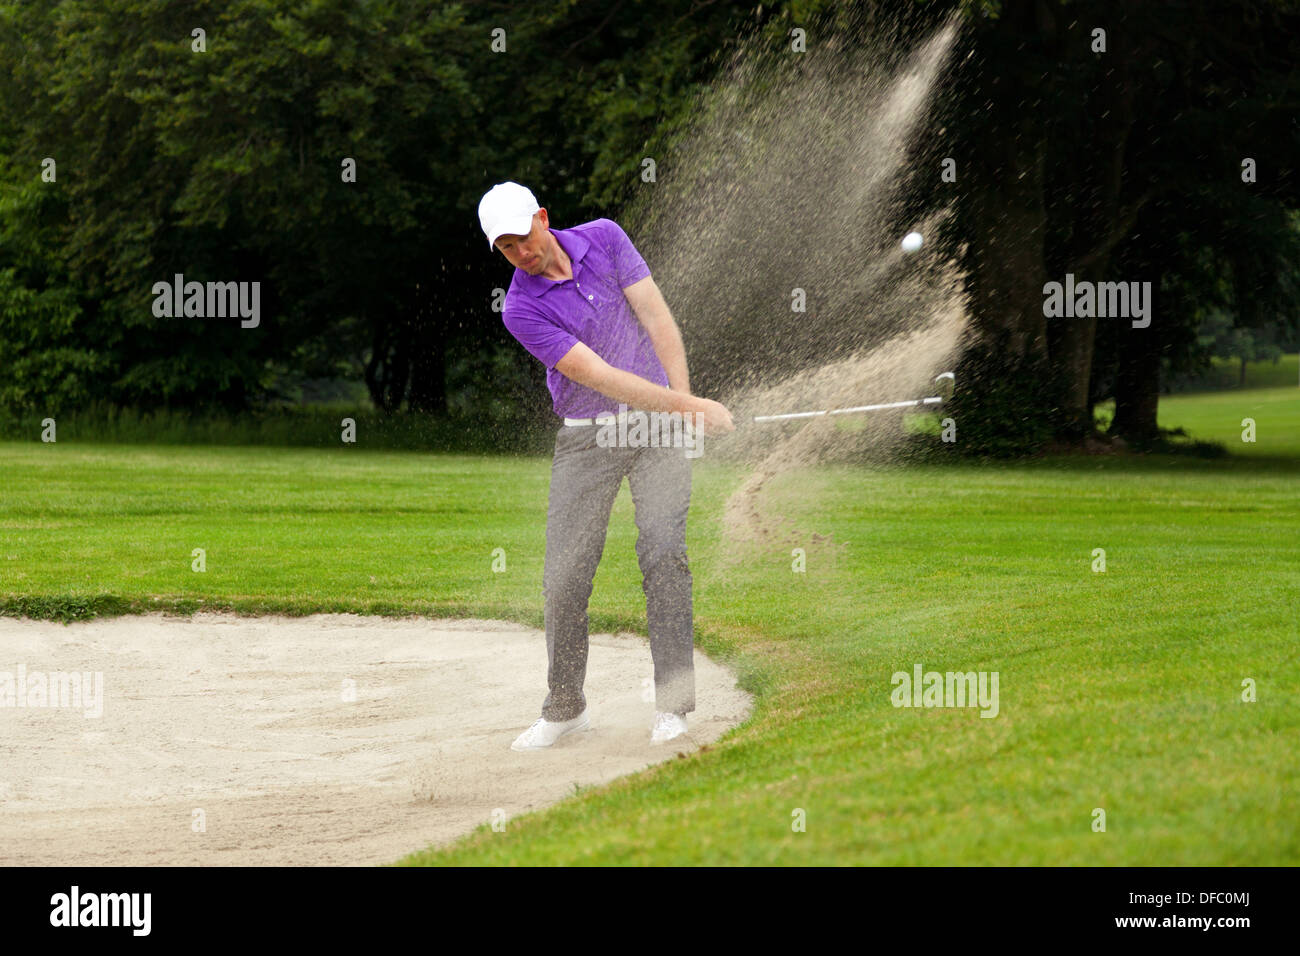 A professional golfer hitting his ball out of a bunker with the sand and ball in mid-air. Stock Photo